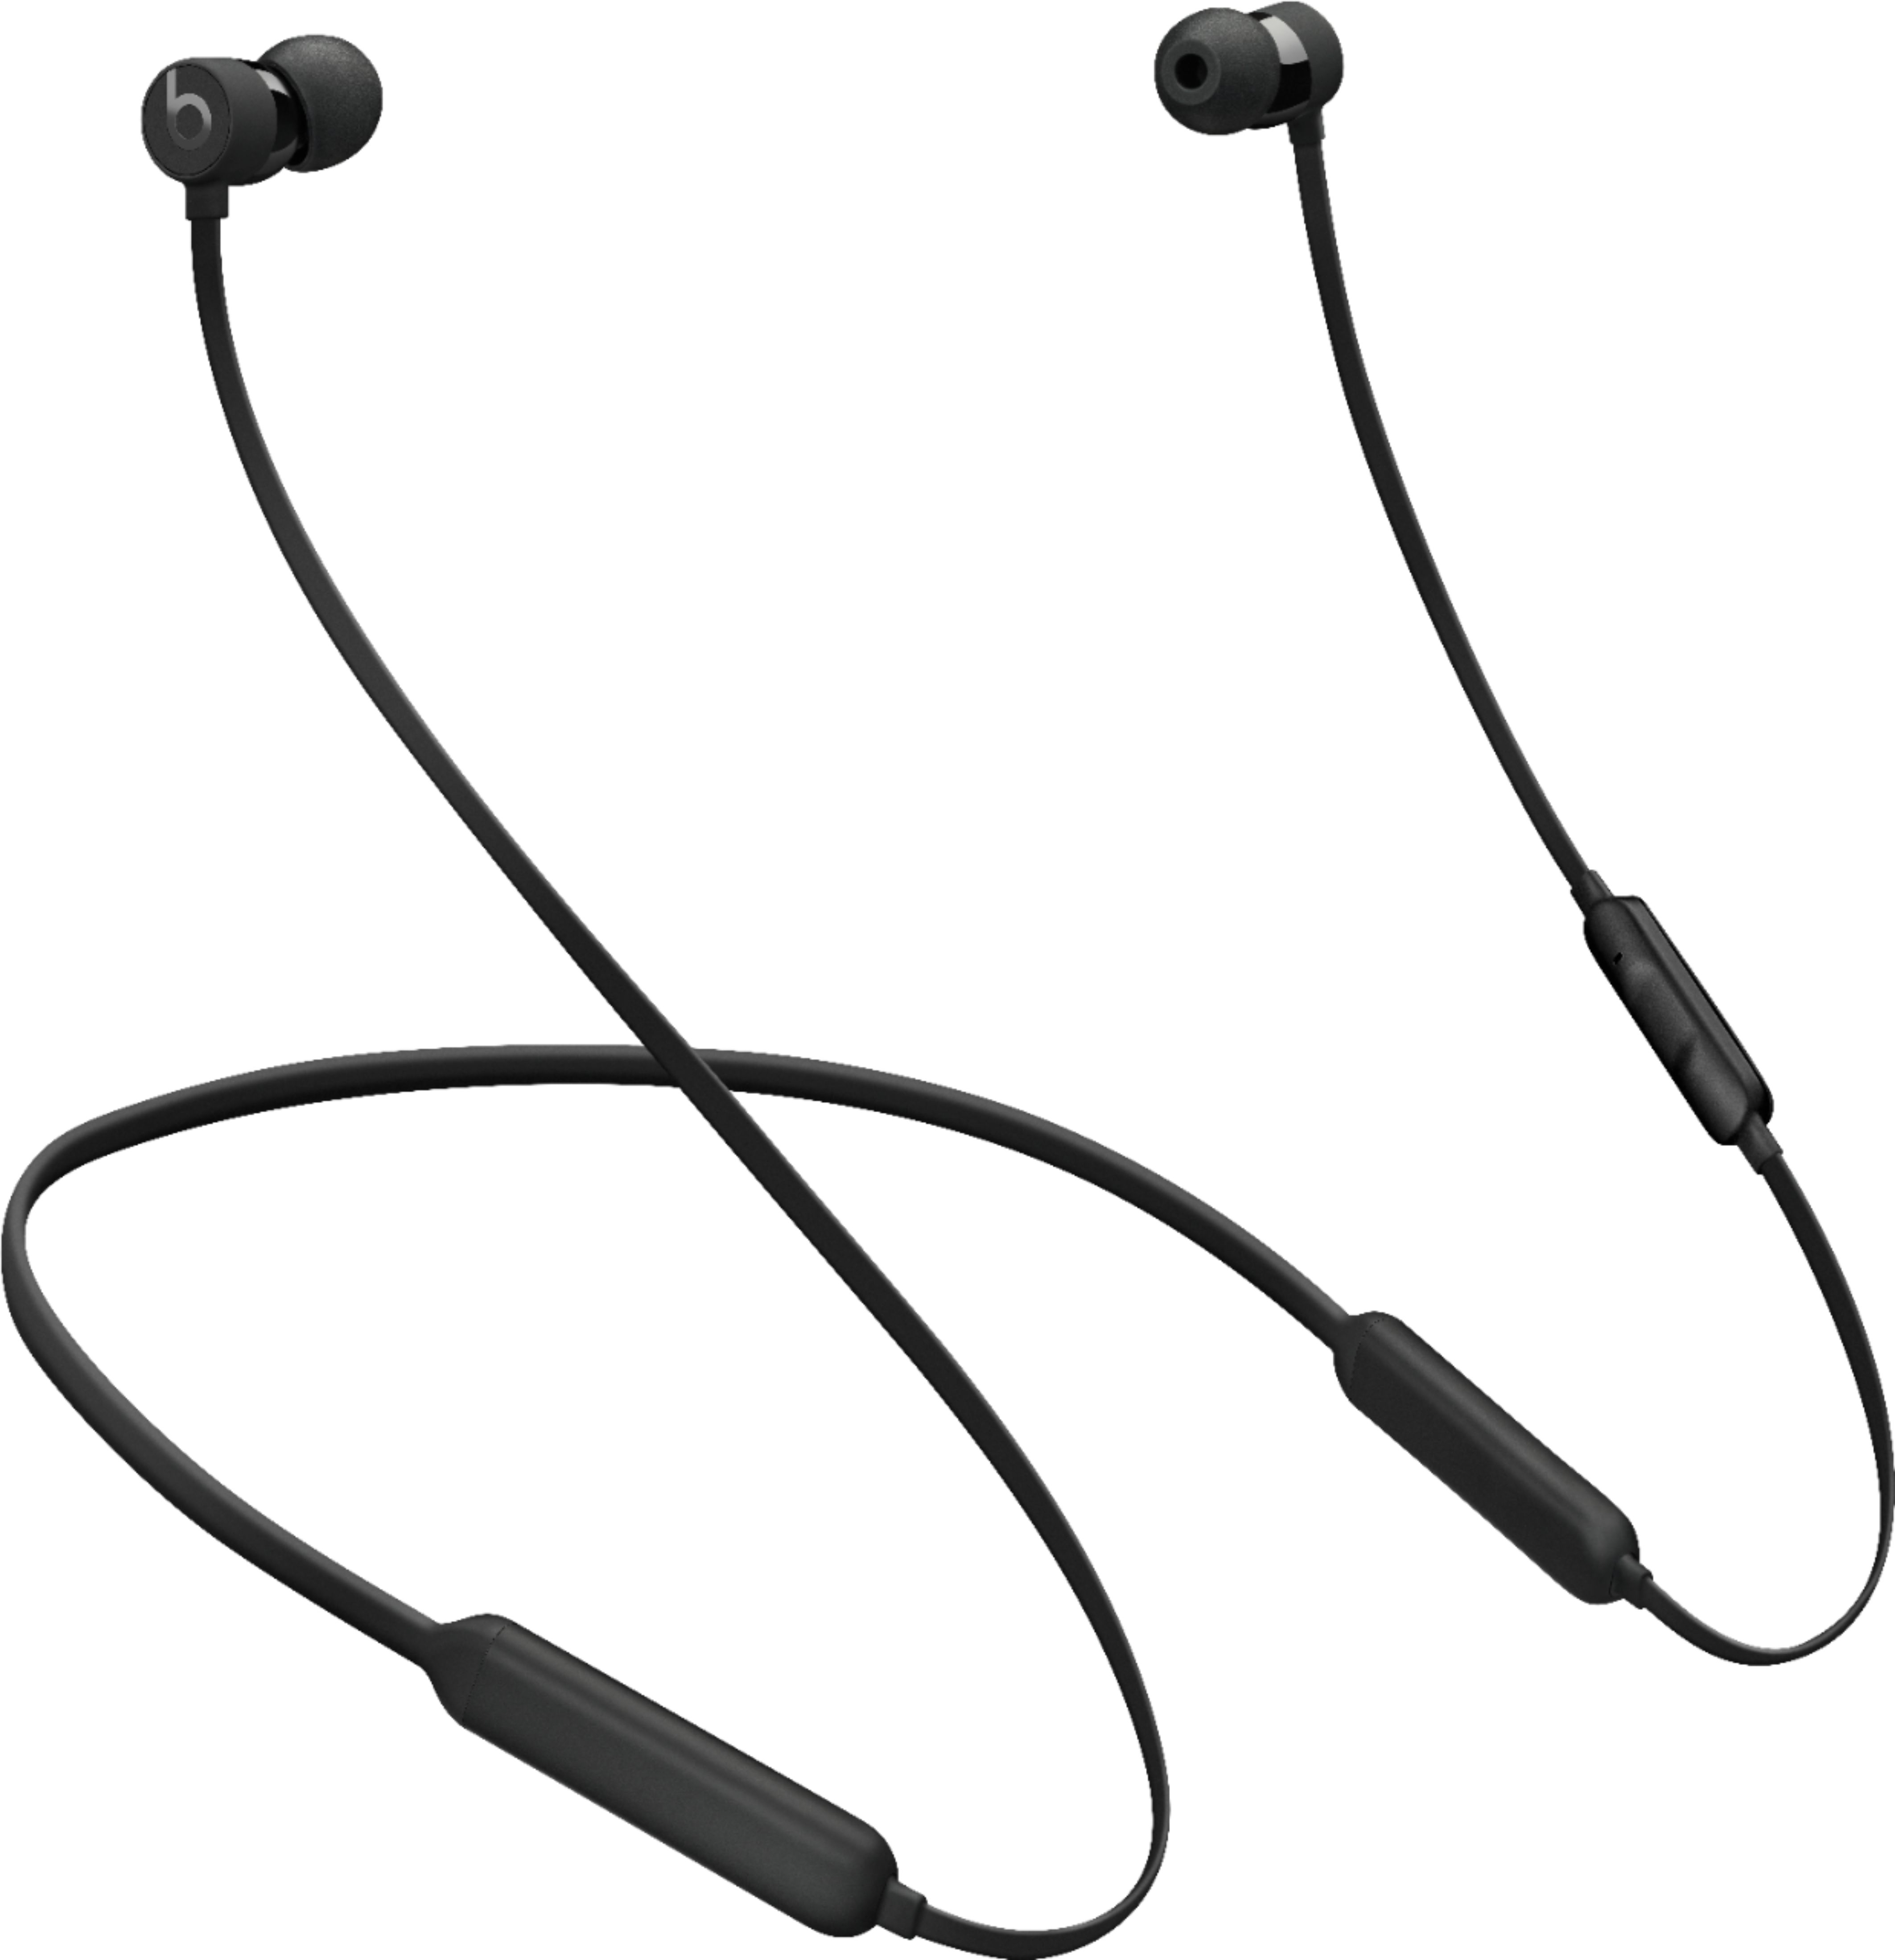 Angle View: Beats by Dr. Dre - Geek Squad Certified Refurbished BeatsX Earphones - Black